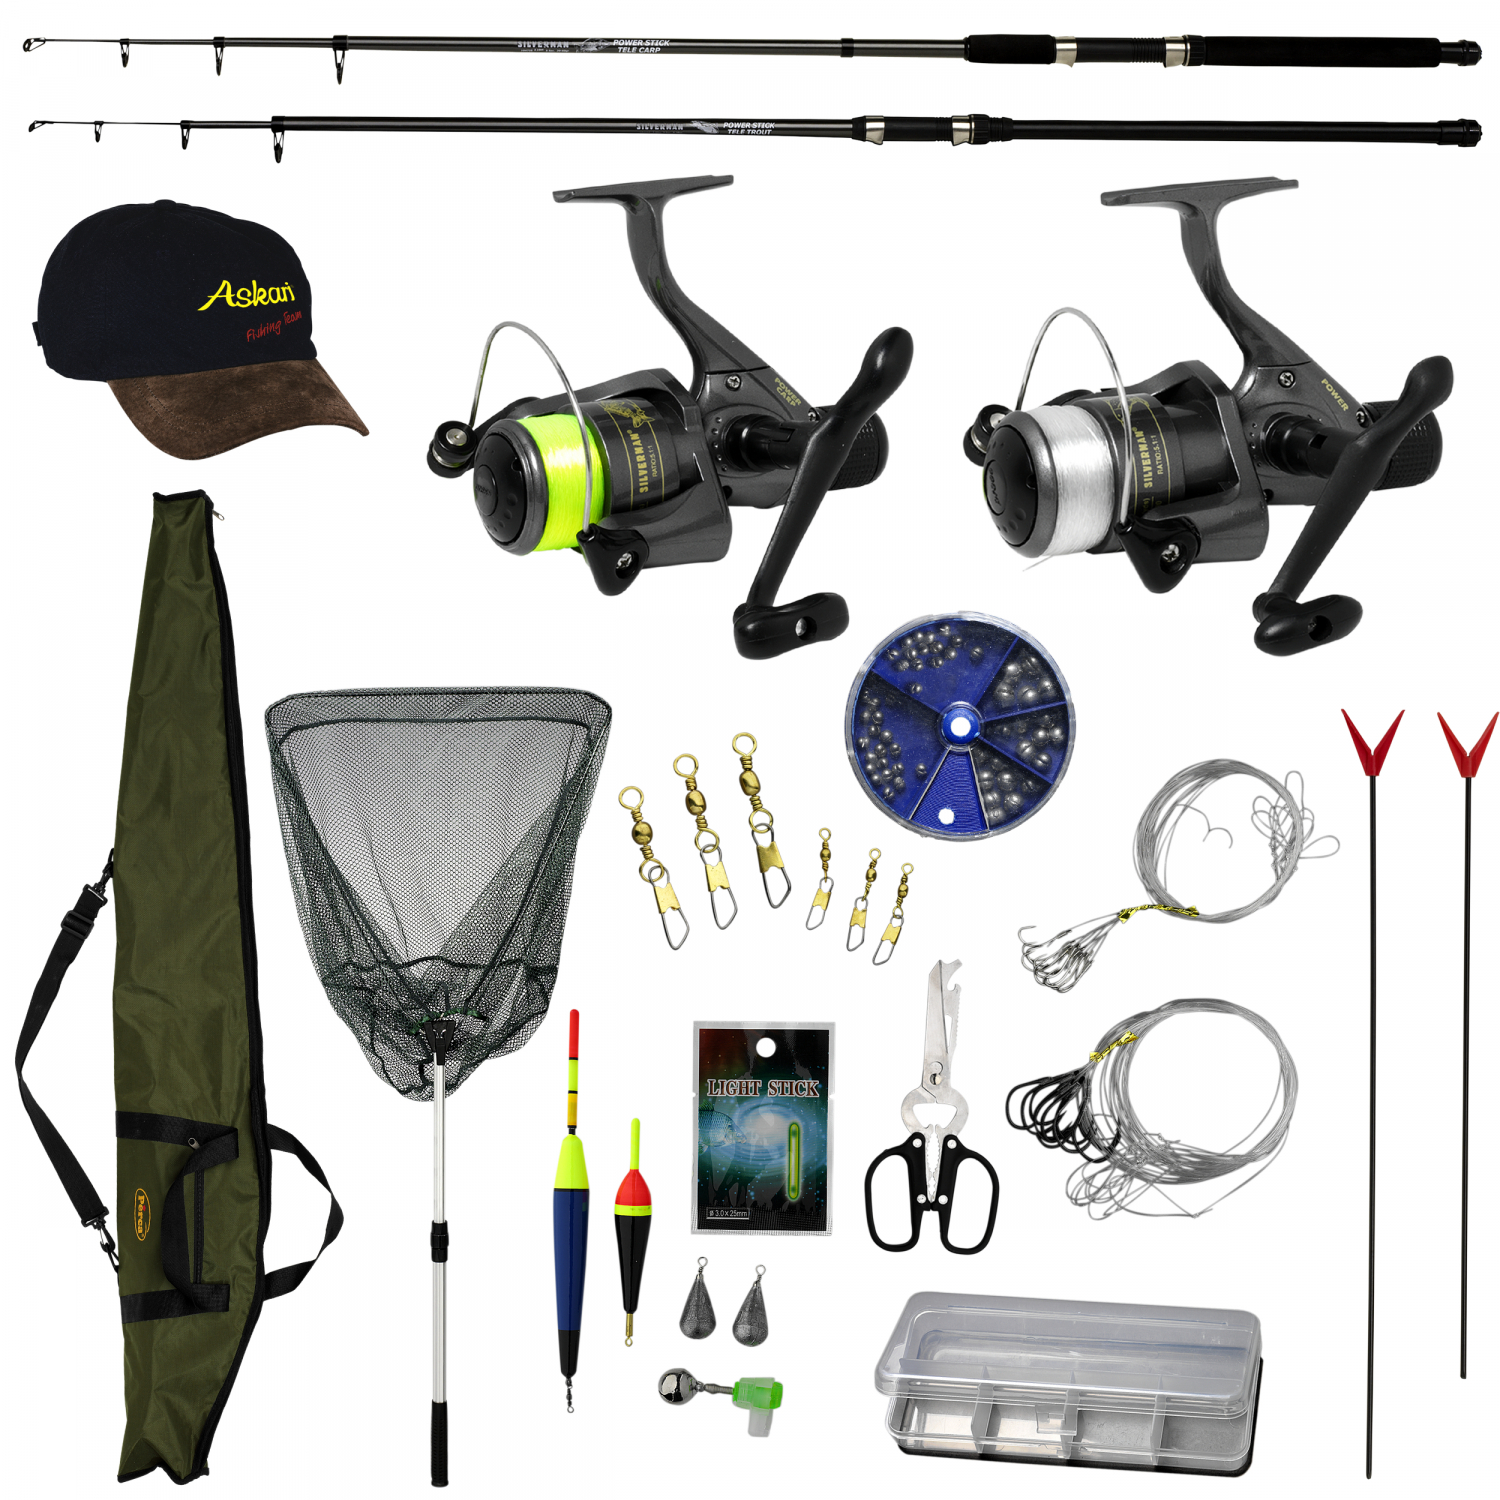 Silverman Fishing Combo at low prices